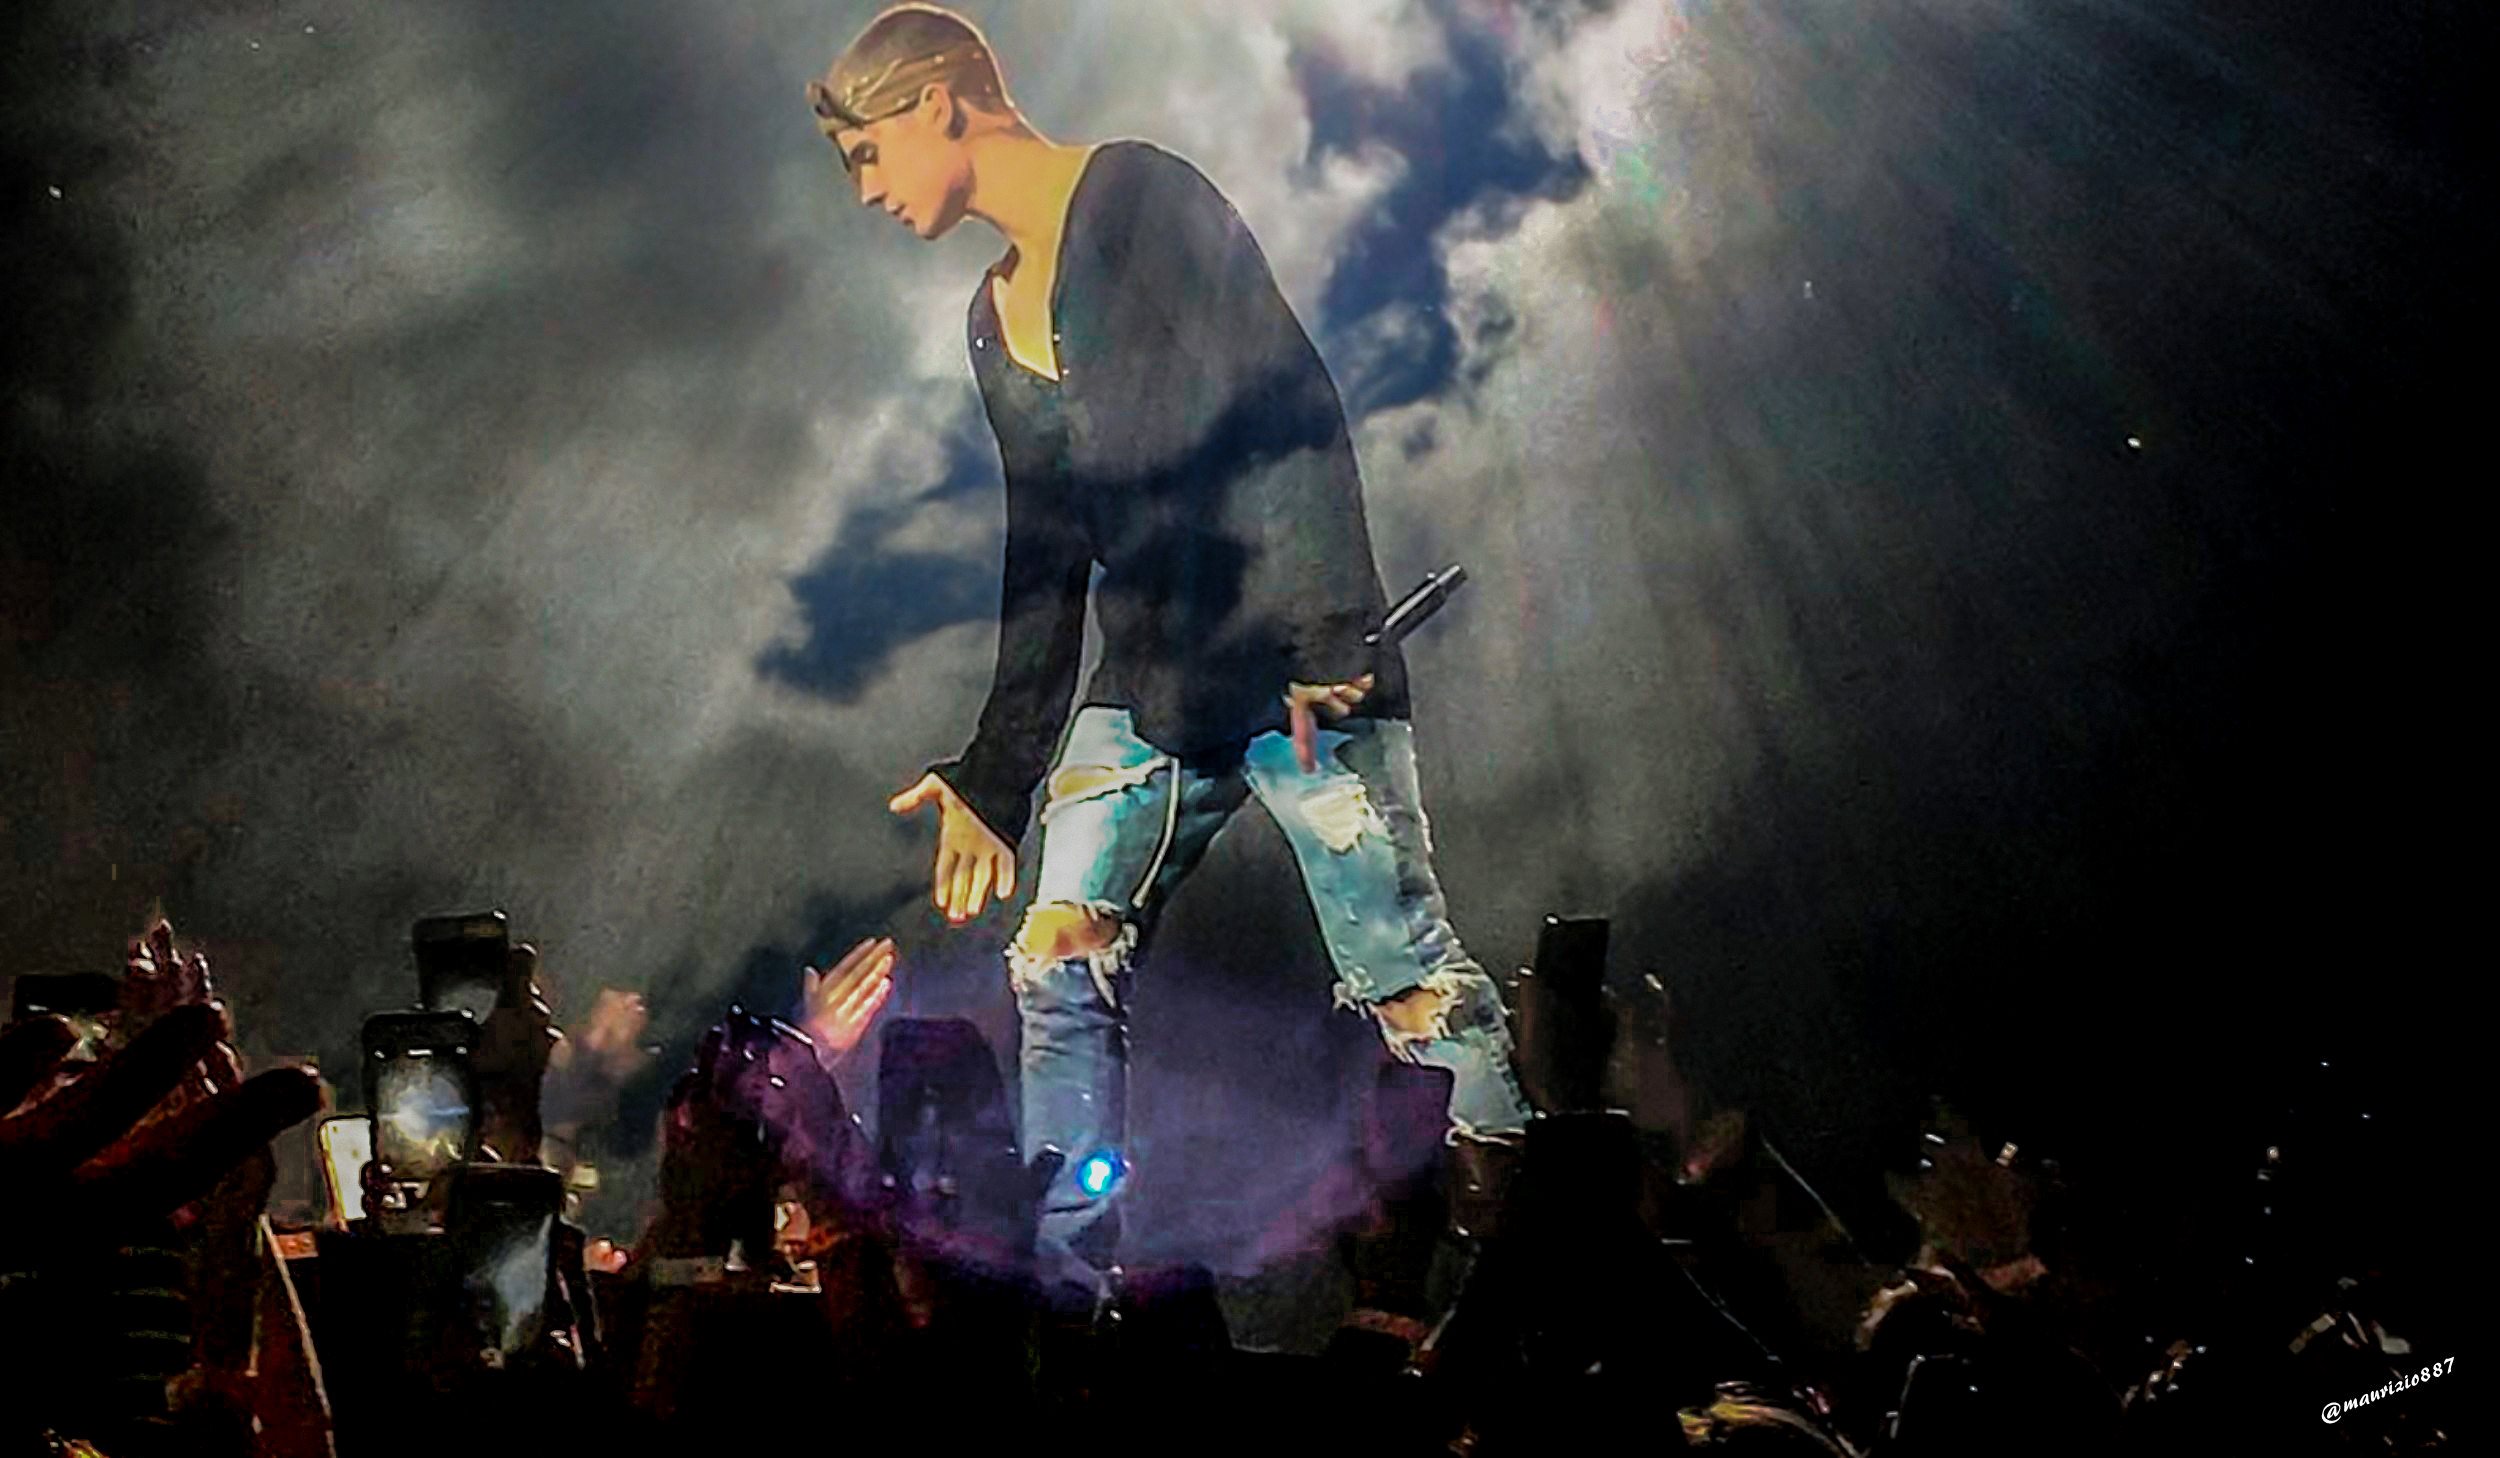 Free Download 21 Justin Bieber Purpose World Tour Wallpapers On Wallpapersafari 2500x1458 For Your Desktop Mobile Tablet Explore 31 Purpose Wallpaper Purpose Wallpaper The Yellow Wallpaper Purpose Justin Bieber Purpose Wallpapers